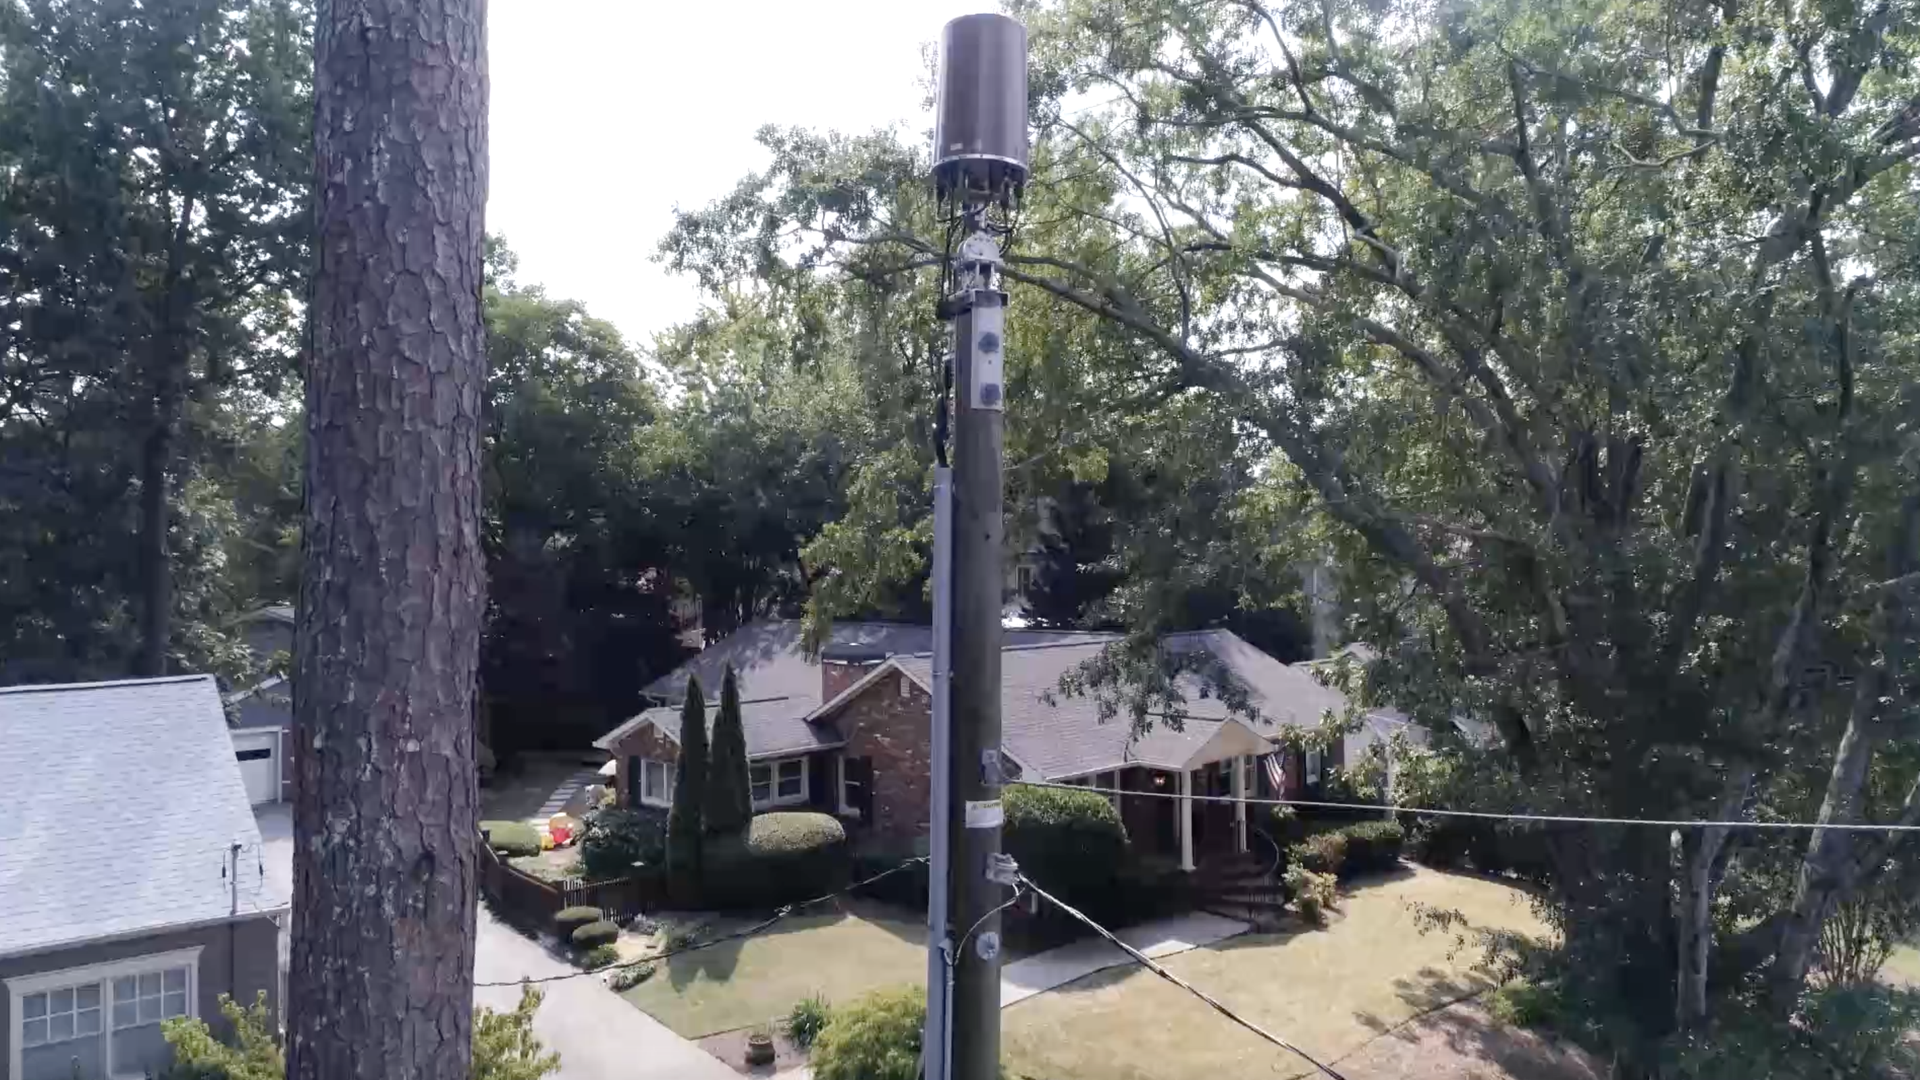 In this picture, a house in a small Georgia neighborhood is pictured with 5G small cell technology